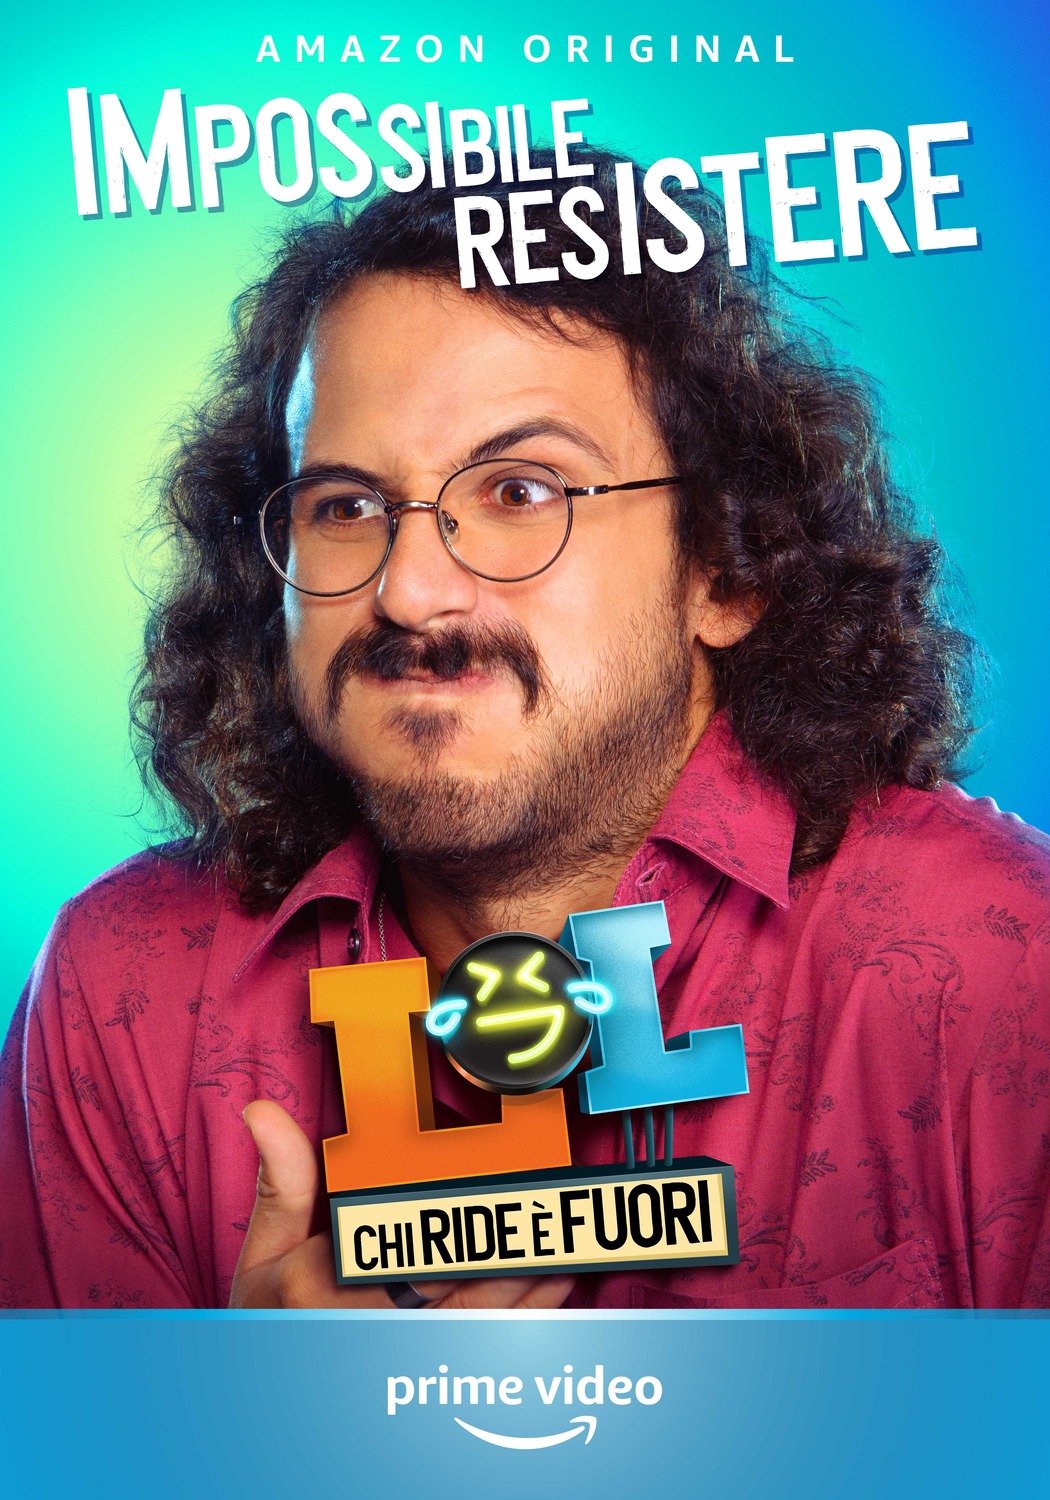 Extra Large TV Poster Image for LOL - Chi ride è fuori (#20 of 46)